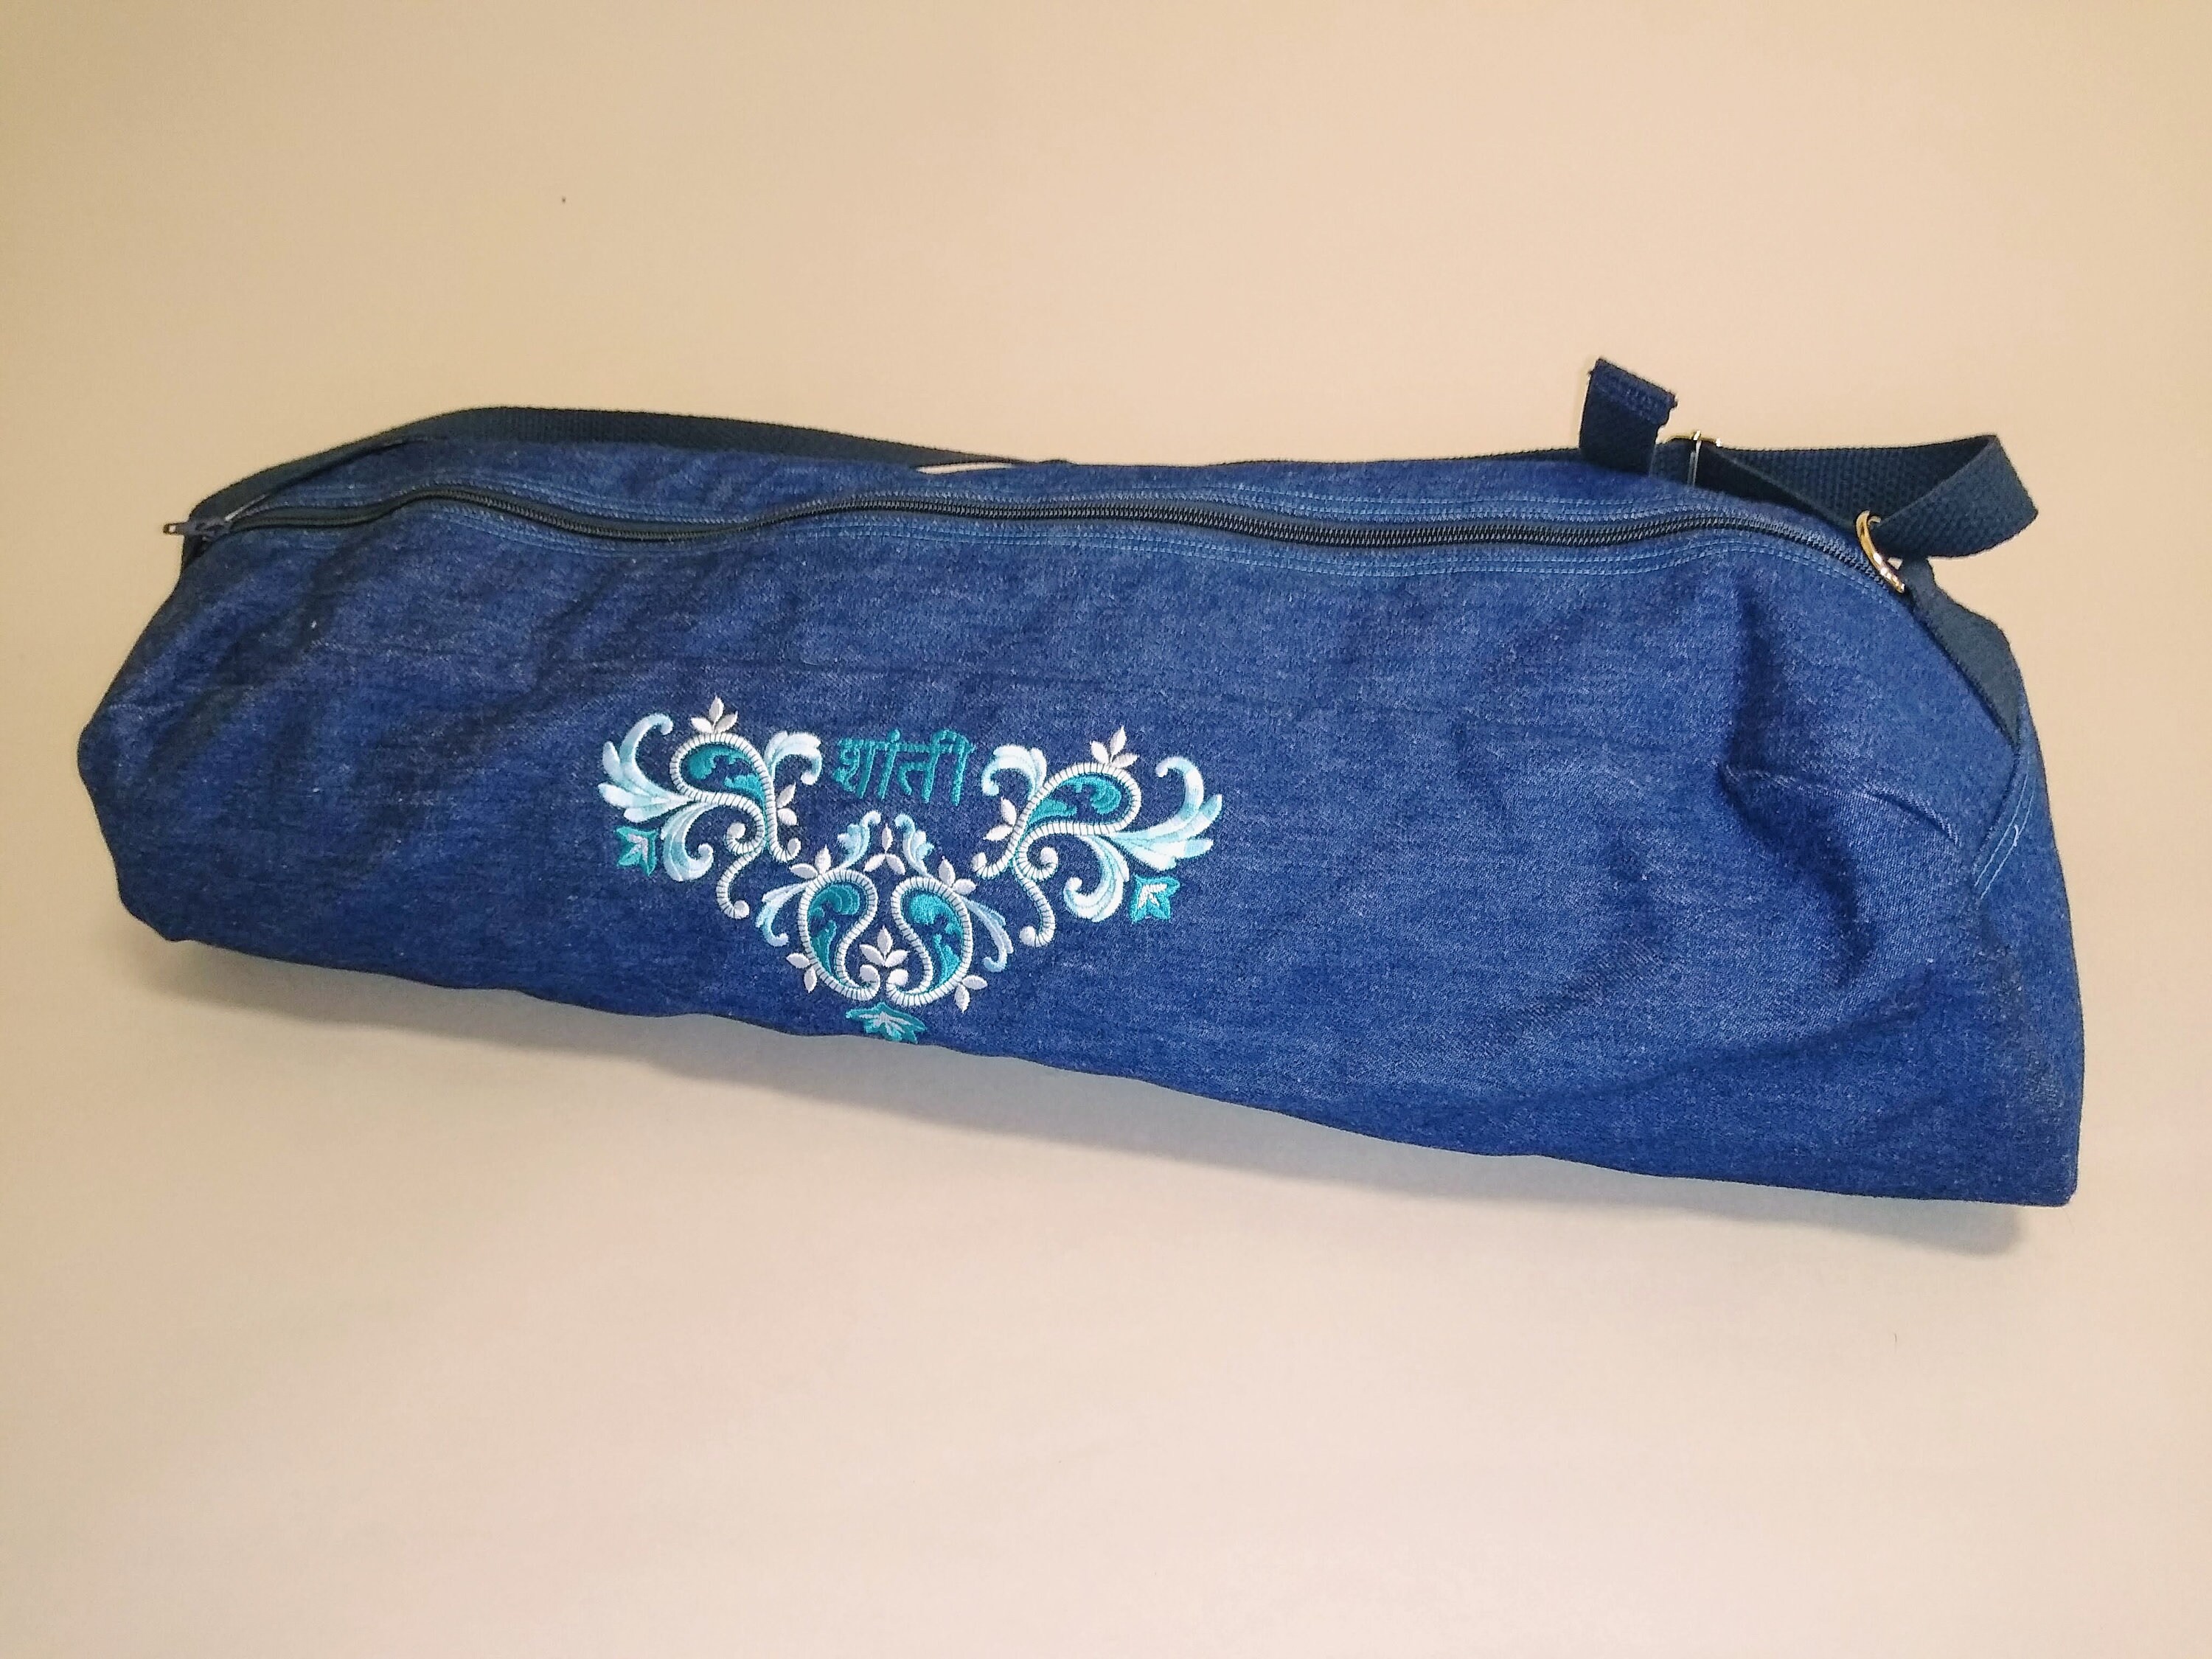 Hide & Drink, Yoga Mat Bag with Adjustable Strap Handmade from Repurposed  Denim (Mat Not Included)